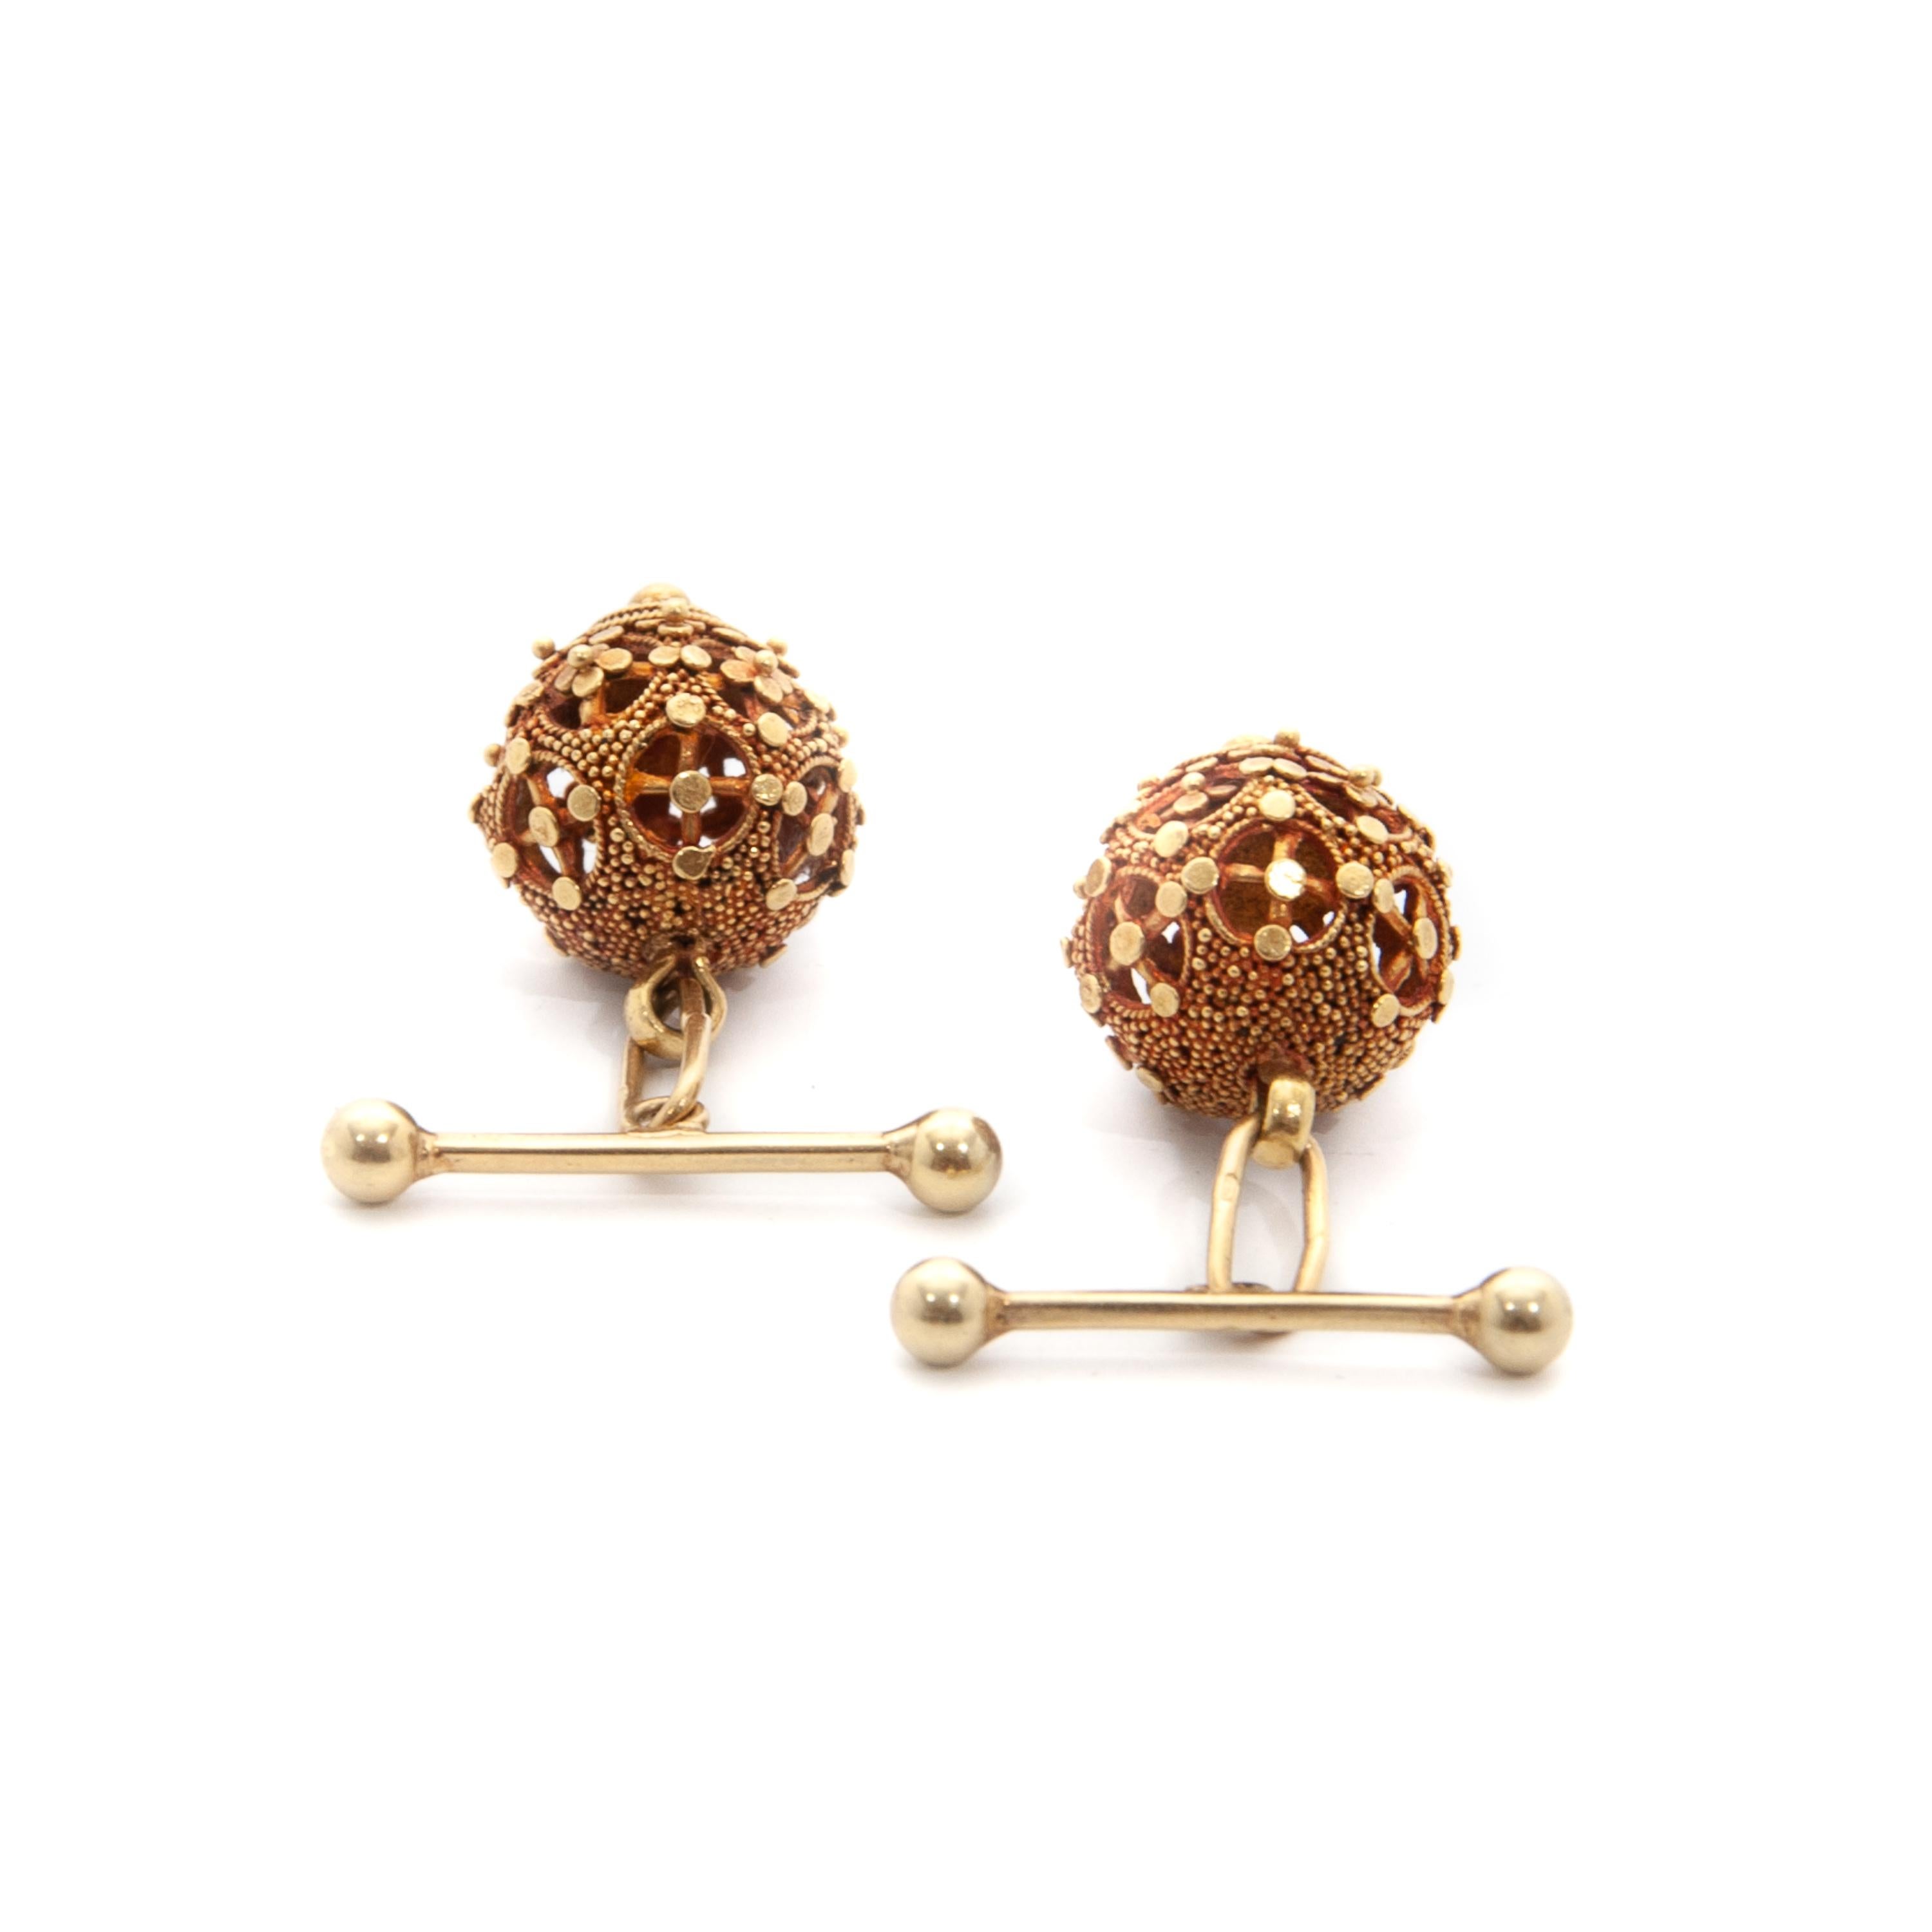 Early 20th Century Cannetille Filigree 14 Karat Gold Cufflinks  In Good Condition For Sale In Rotterdam, NL